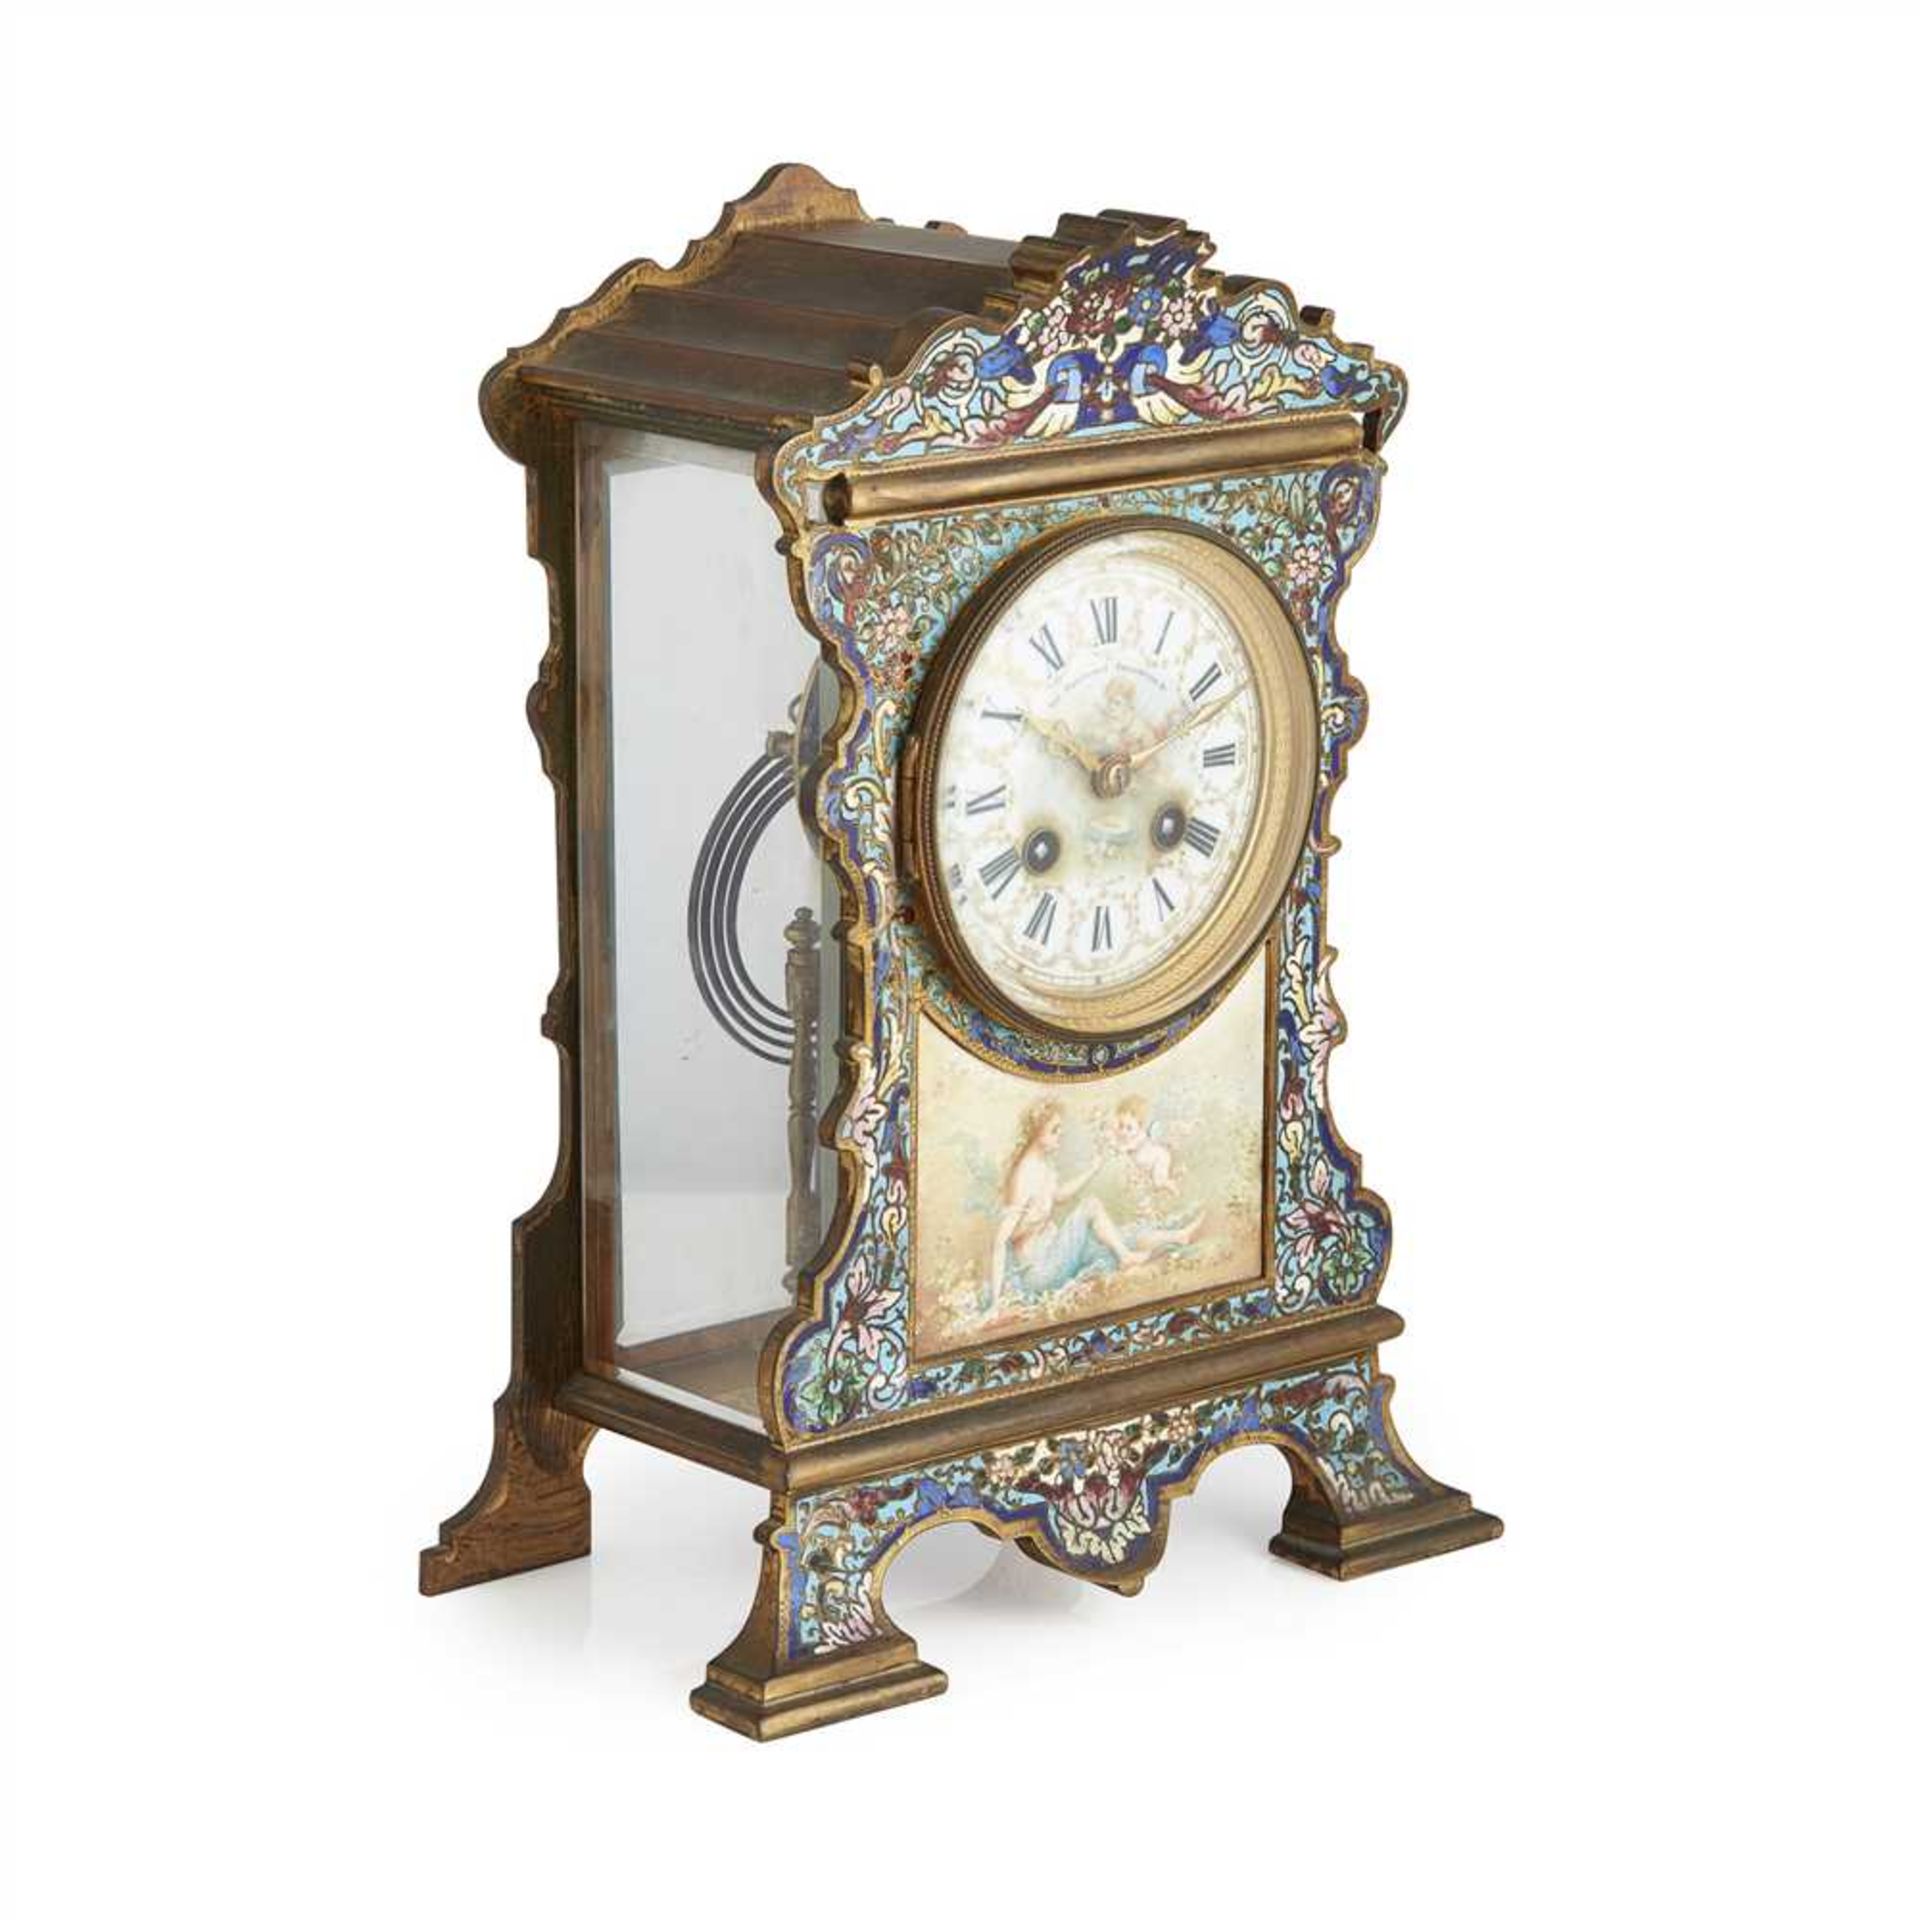 FRENCH CHAMPLEVÉ ENAMEL MANTEL CLOCK LATE 19TH CENTURY - Image 2 of 7